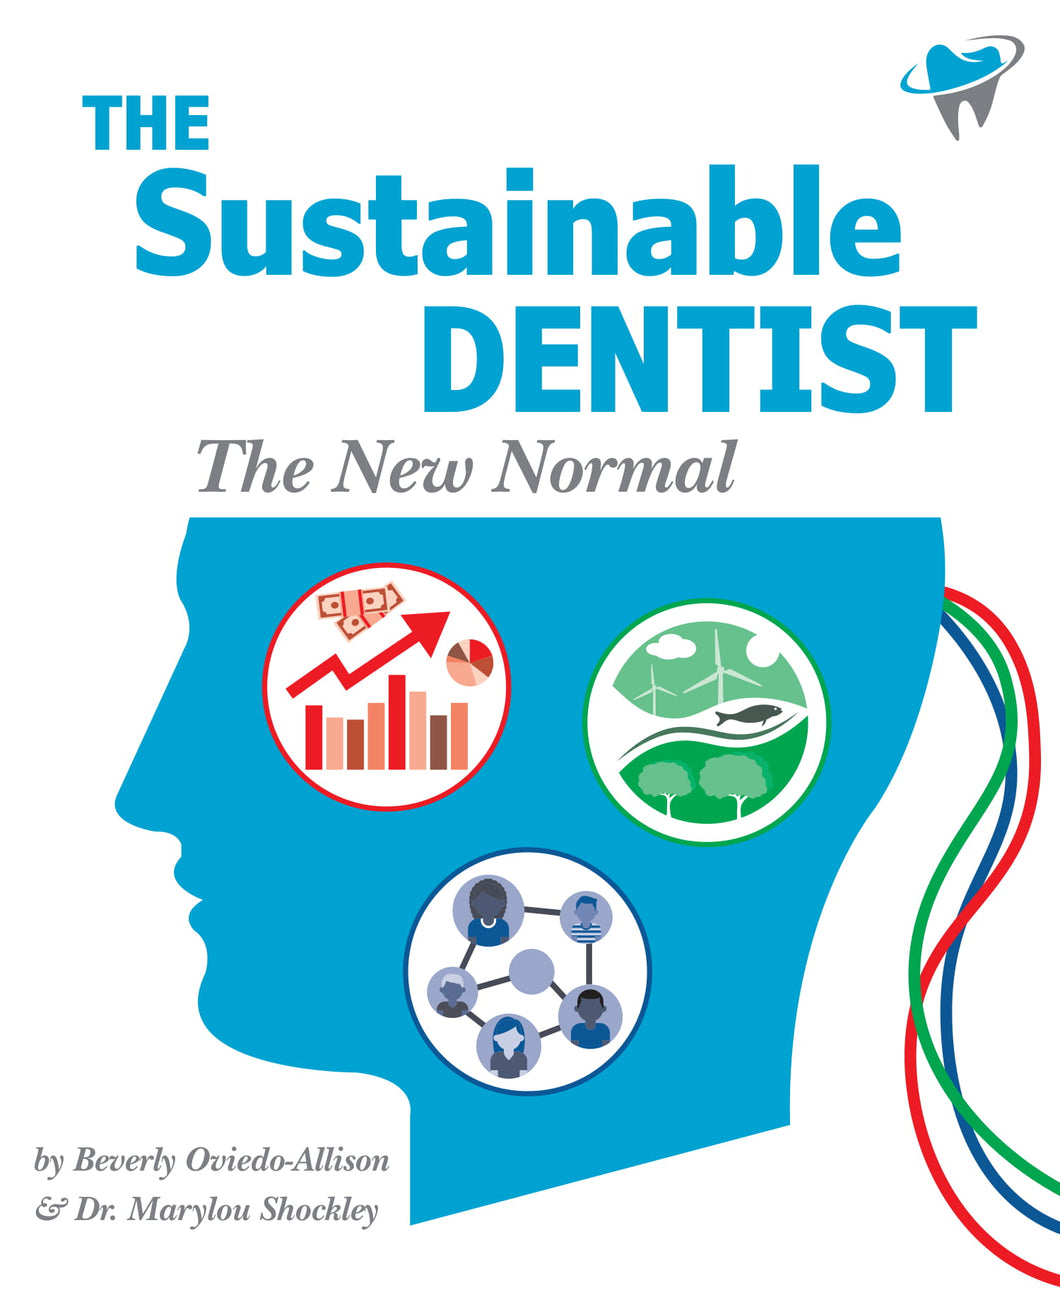 The Sustainable Dentist - The New Normal